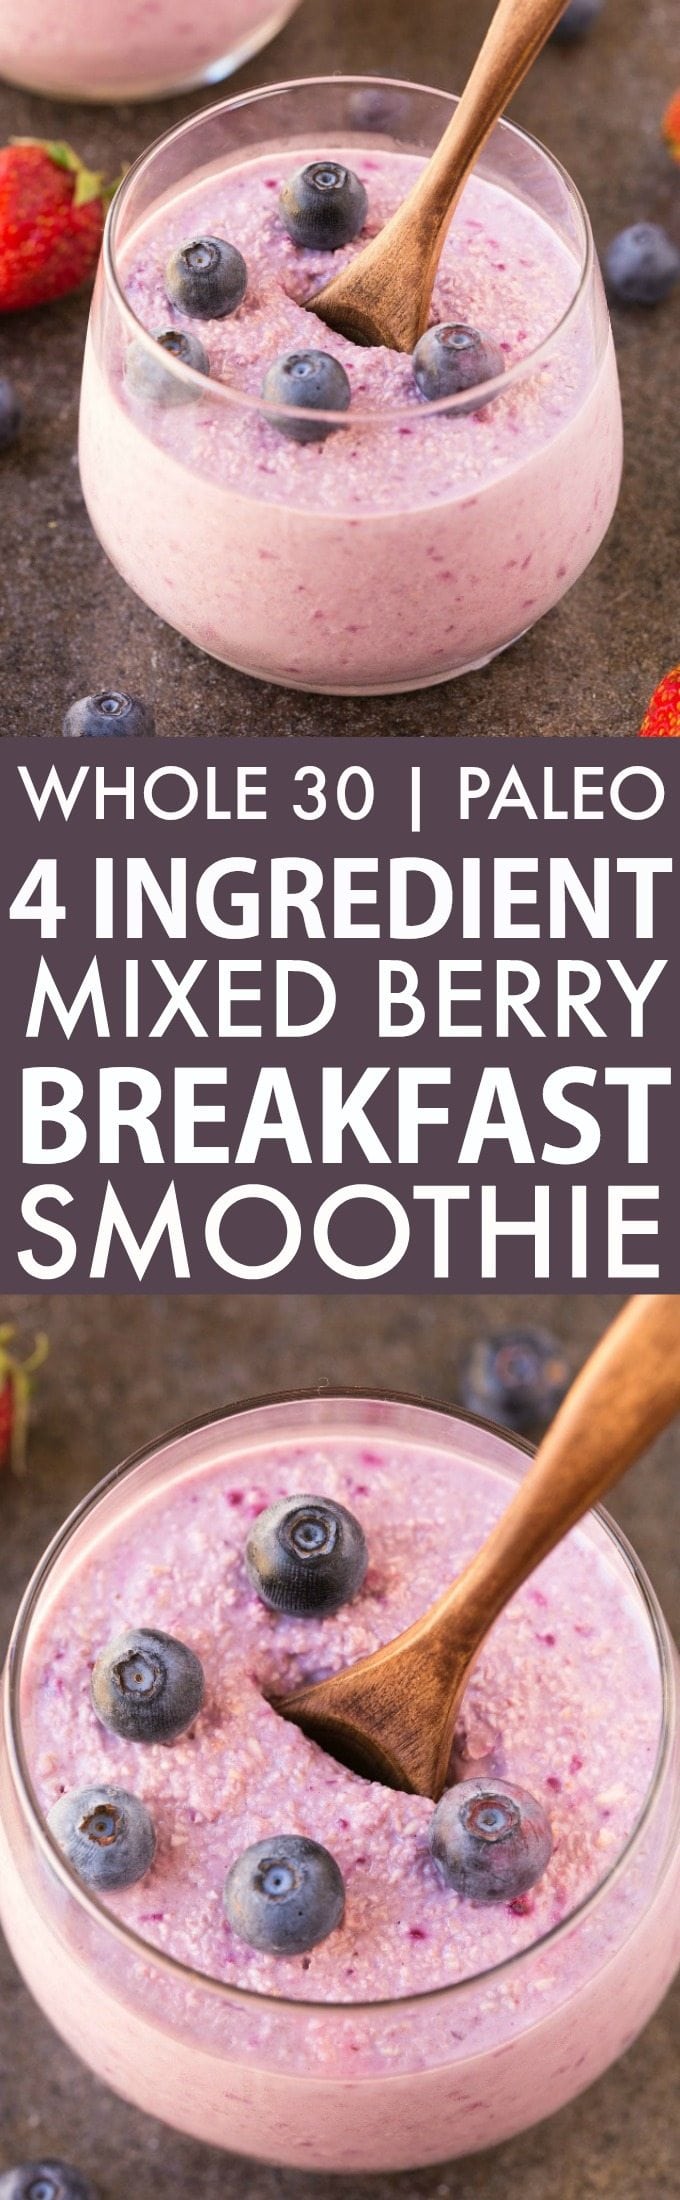 4 Ingredient Mixed Berry Breakfast Smoothie without yogurt, but ultra thick and creamy